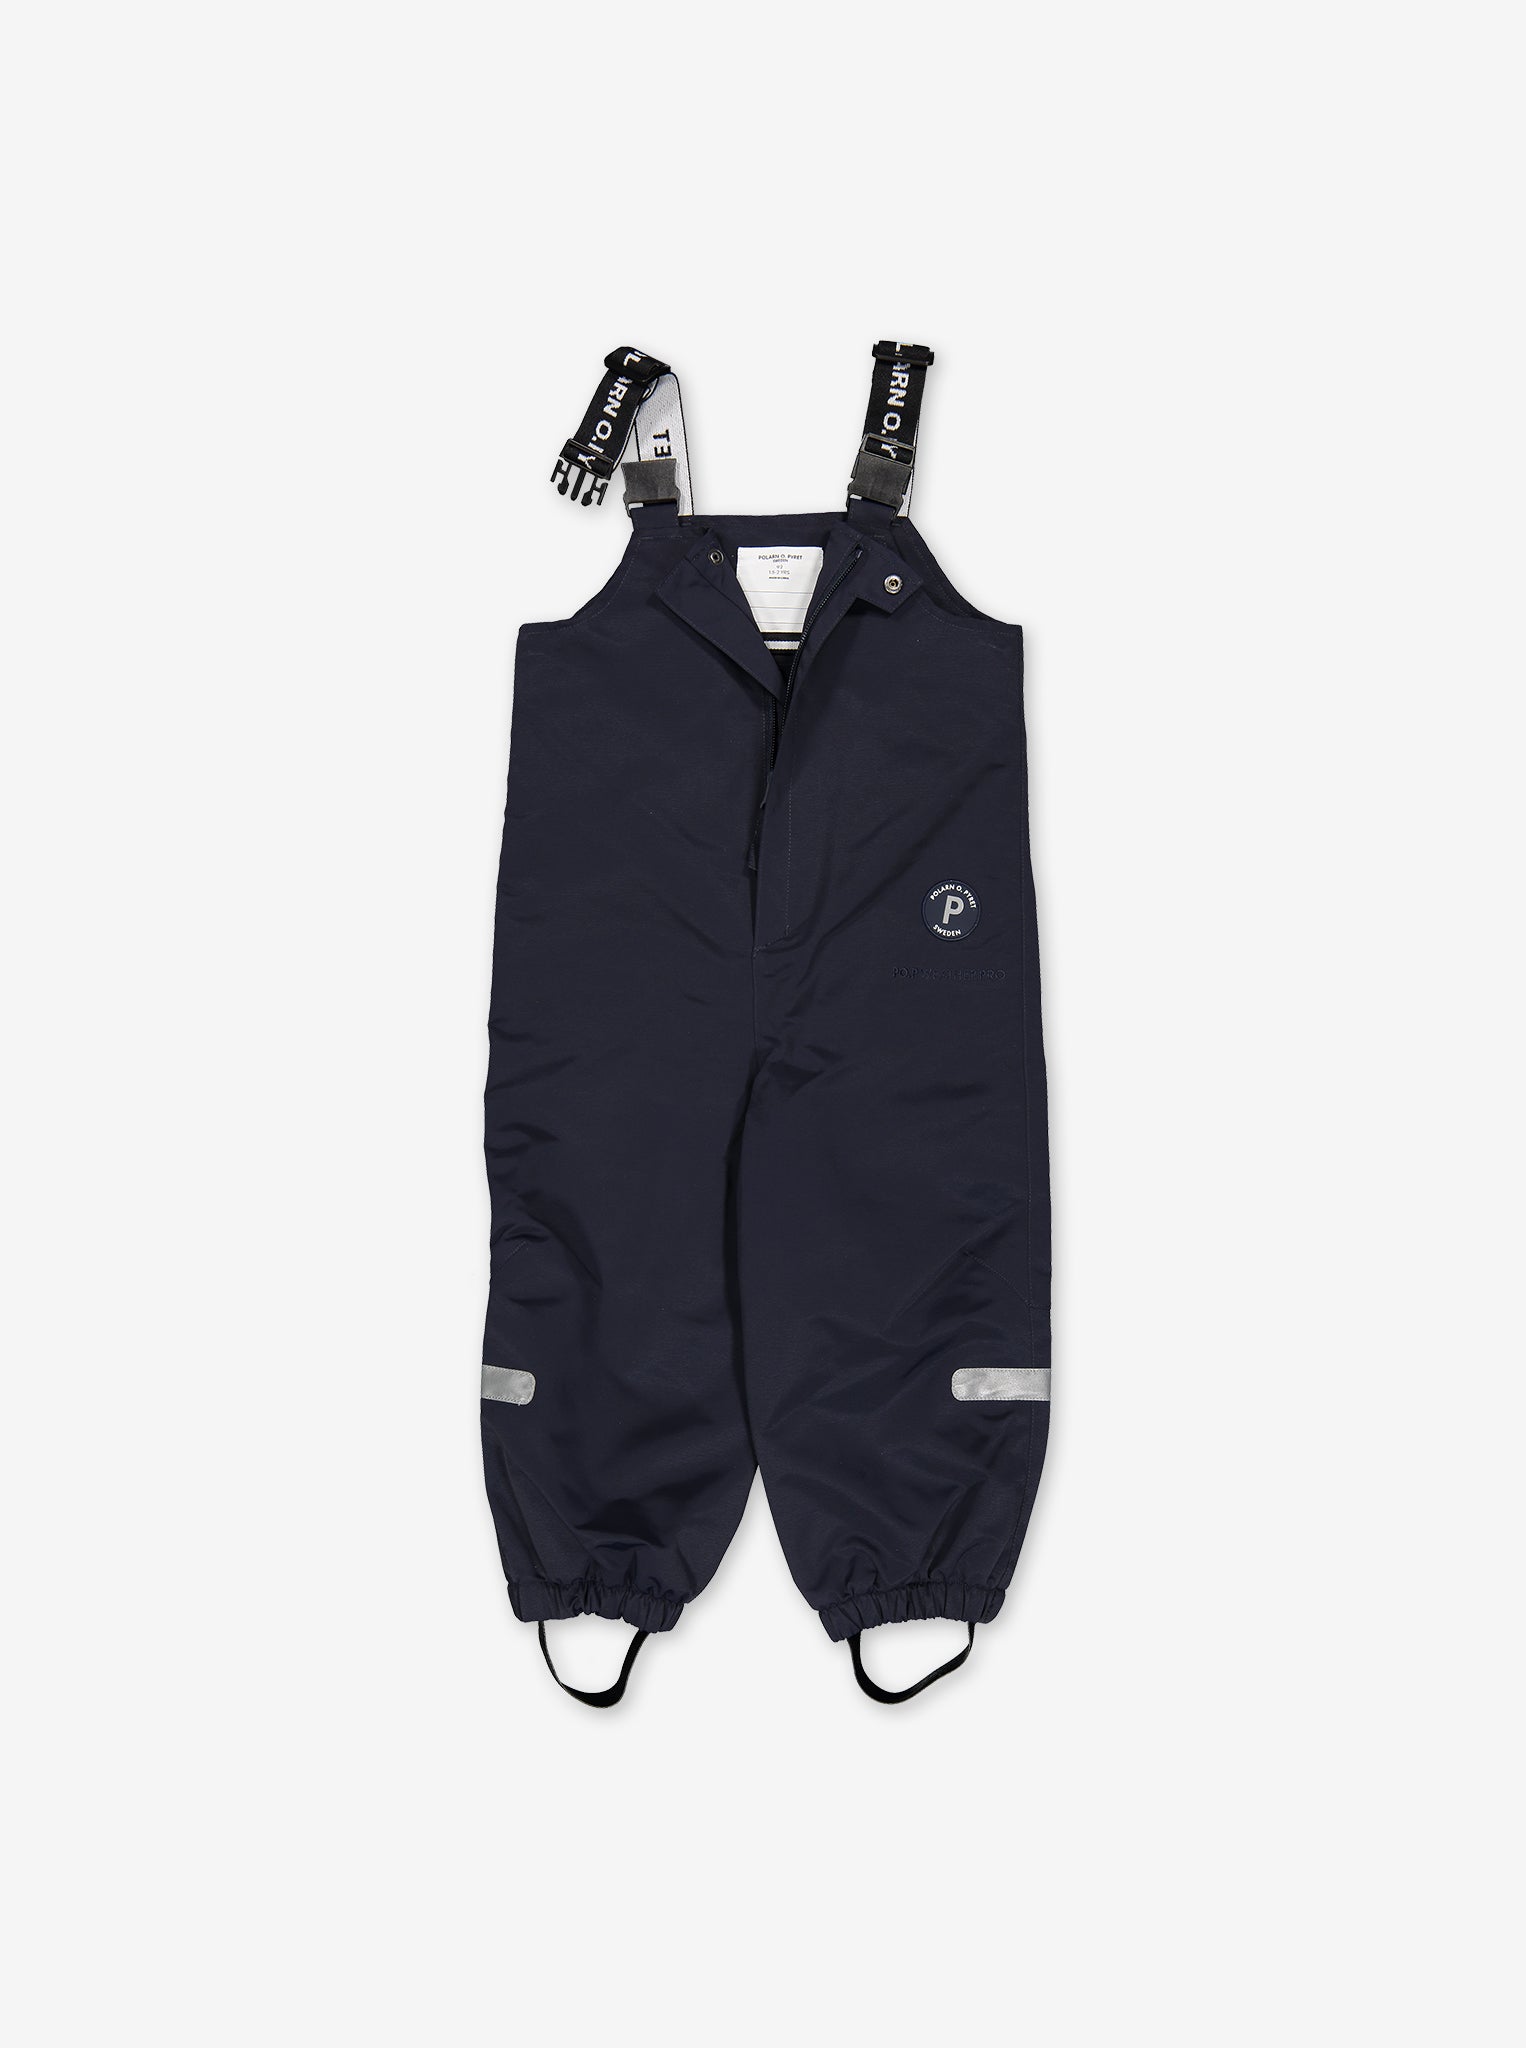 Baby waterproof black dungarees, ethical waterproof warm and comfortably high quality